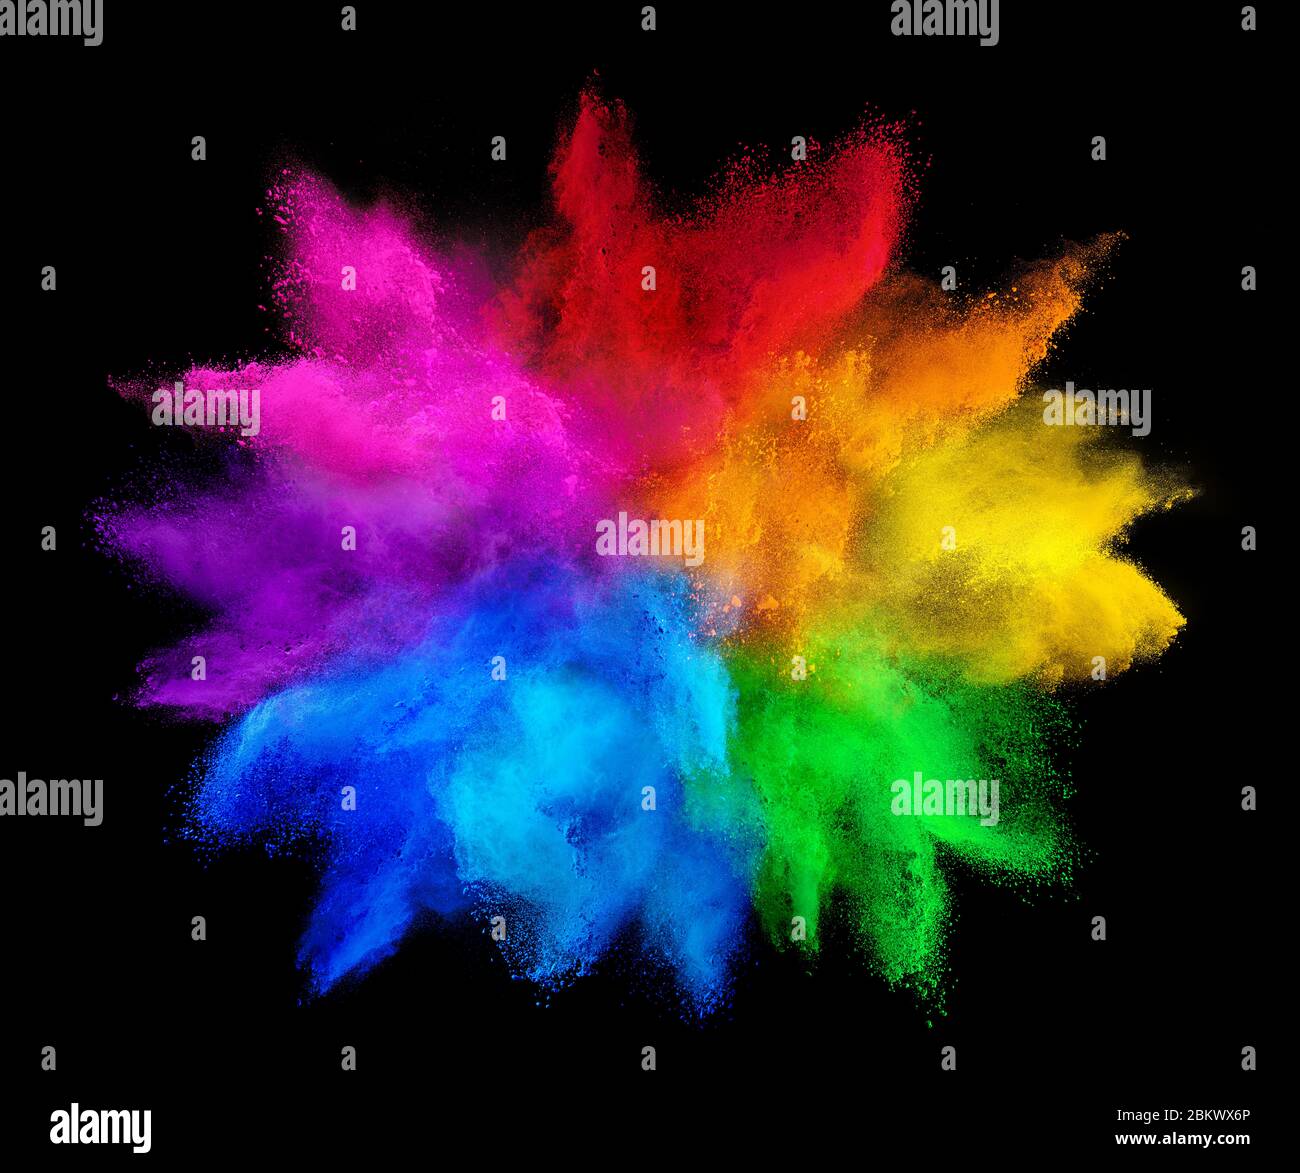 https://c8.alamy.com/comp/2BKWX6P/colorful-rainbow-holi-paint-color-powder-explosion-isolated-on-dark-black-background-peace-rgb-gaming-beautiful-party-festival-concept-2BKWX6P.jpg